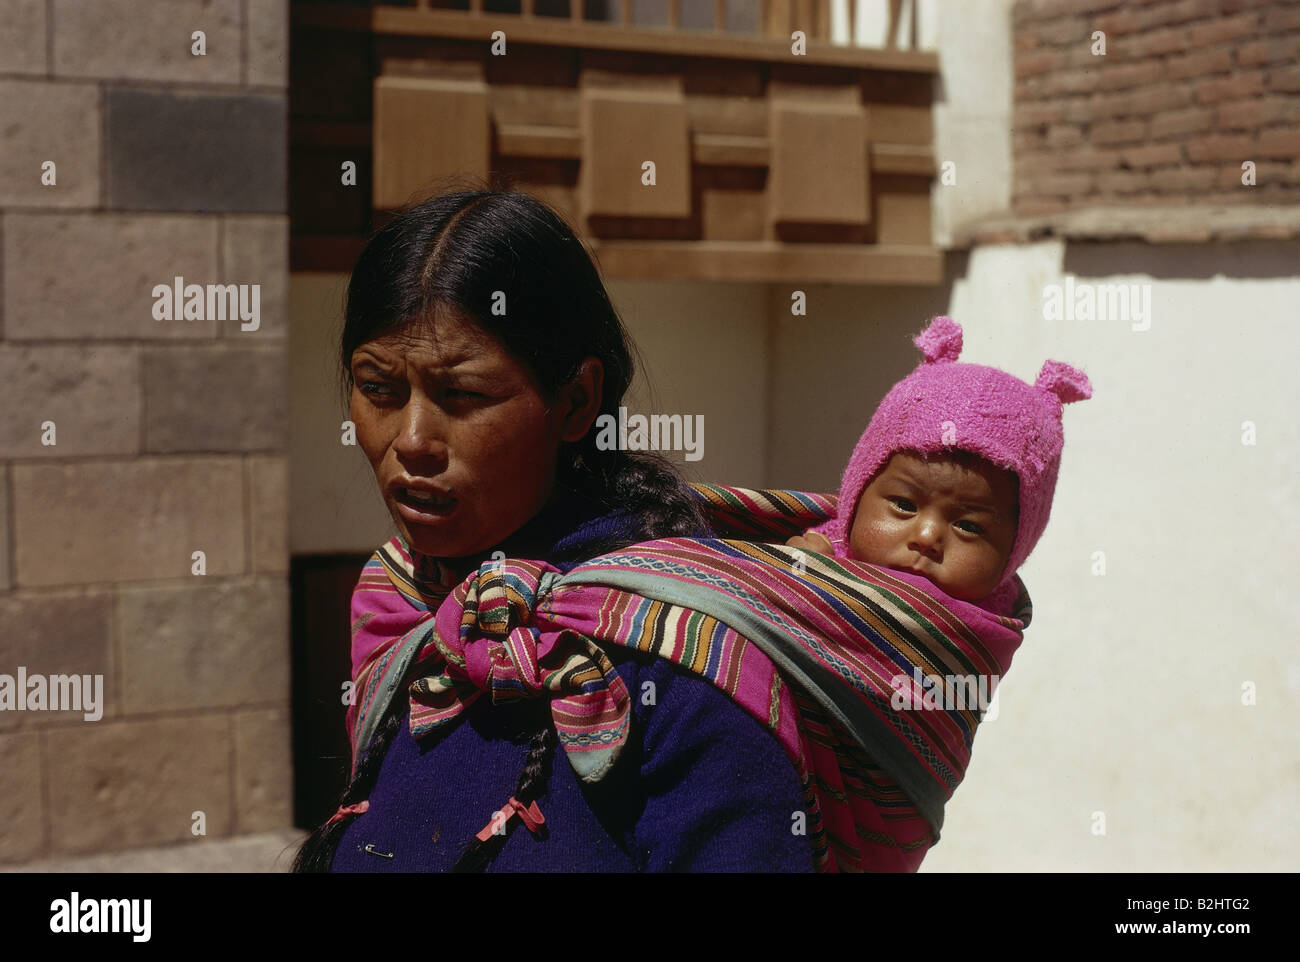 people, women with children, Peru, indigenous woman with infant, baby-sling, Cusco, mother, handcraft, ethnic, ethnology, carry- Stock Photo